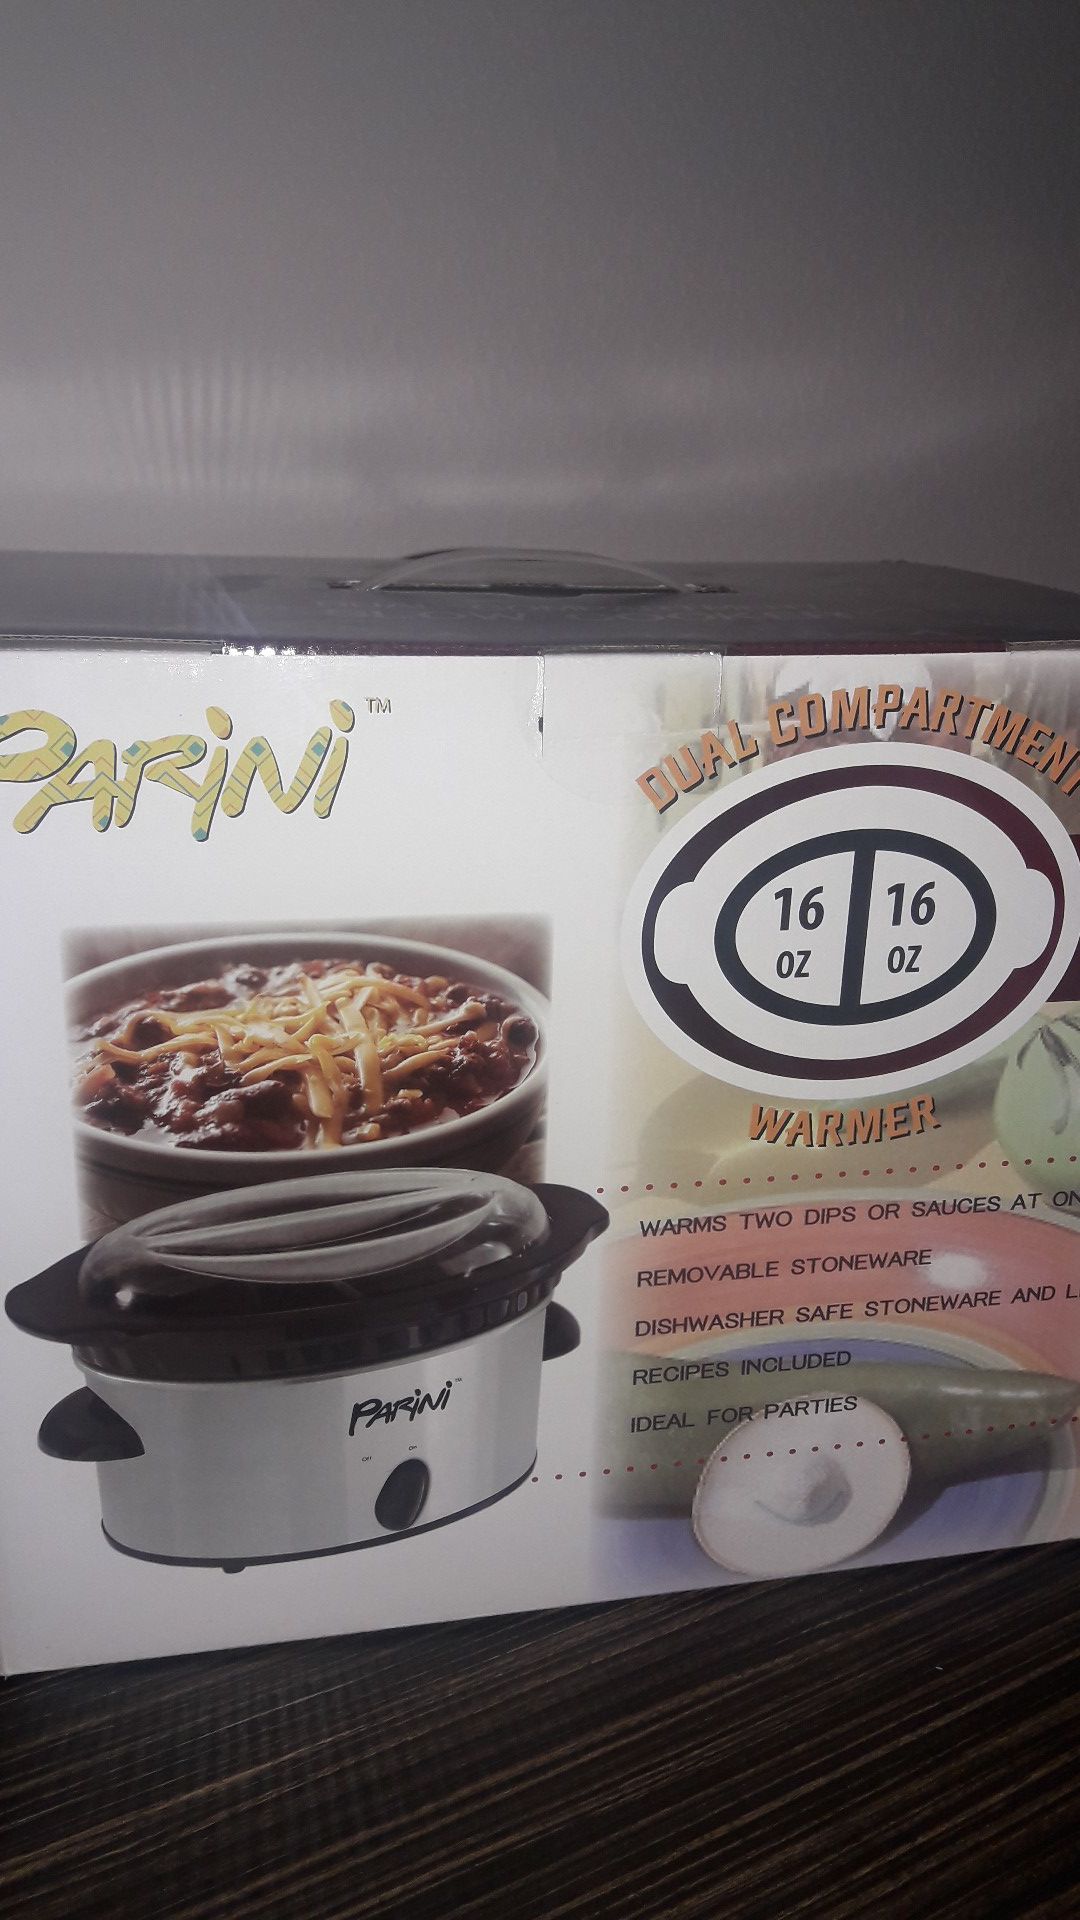 Parini Dual Compartment Slow Cooker New in Box - appliances - by